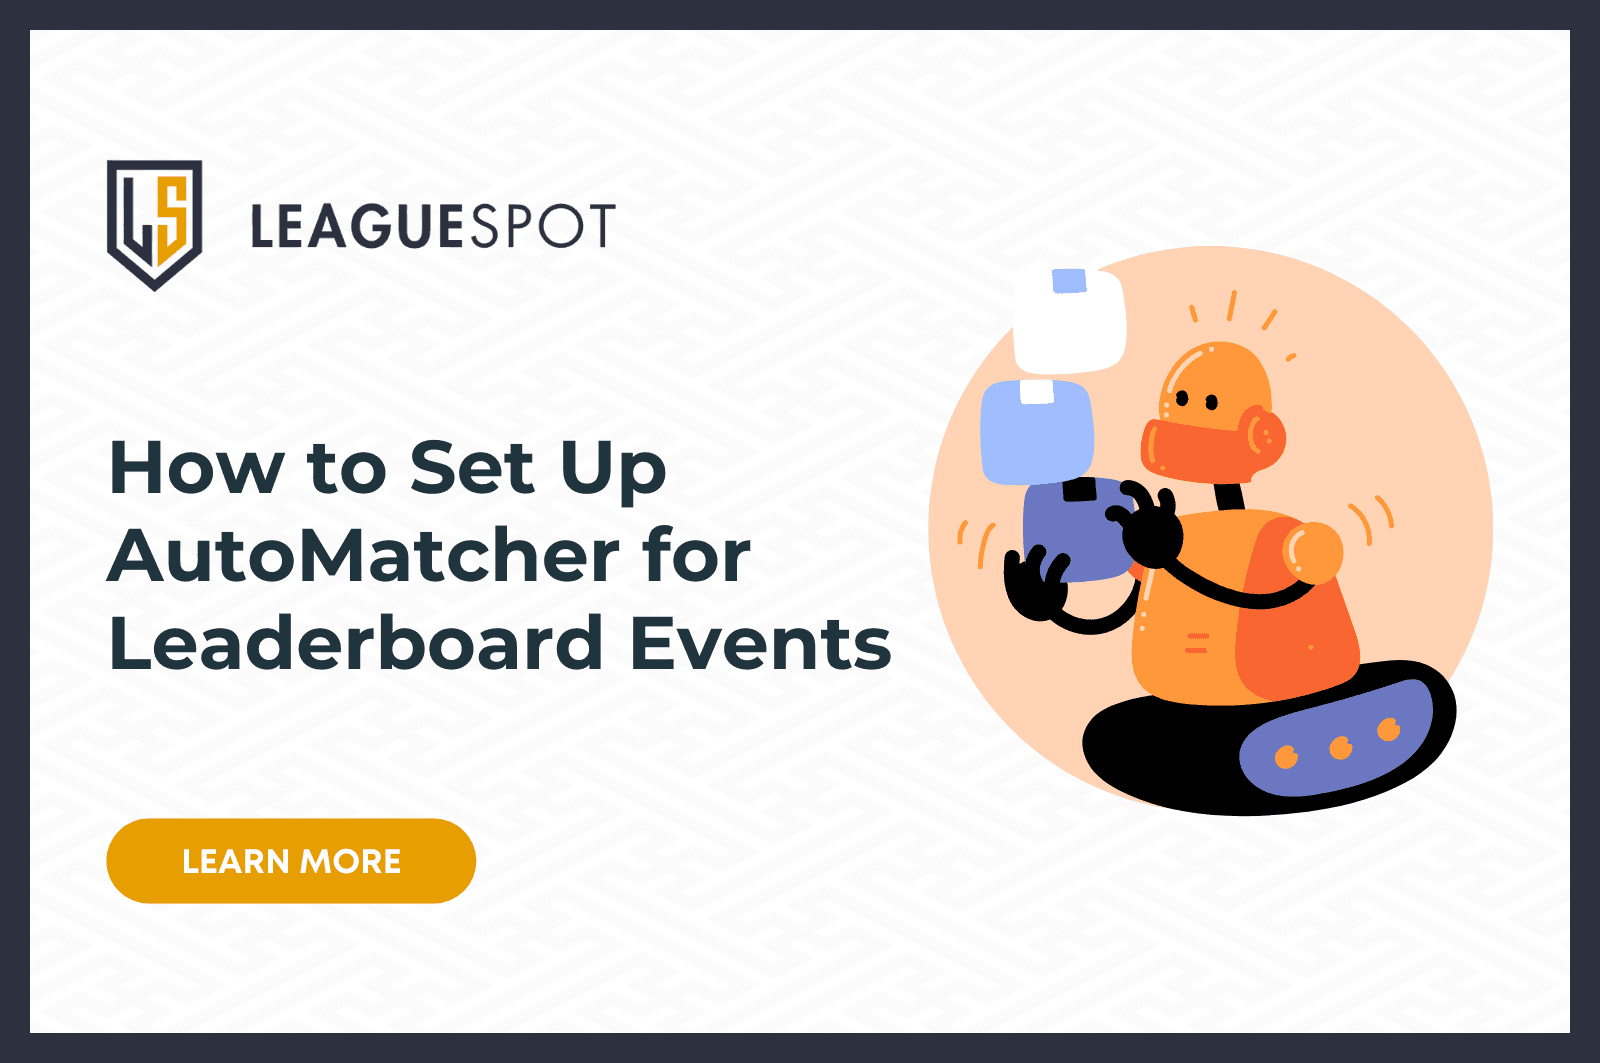 How to Set Up Auto Matcher for Leaderboard Events